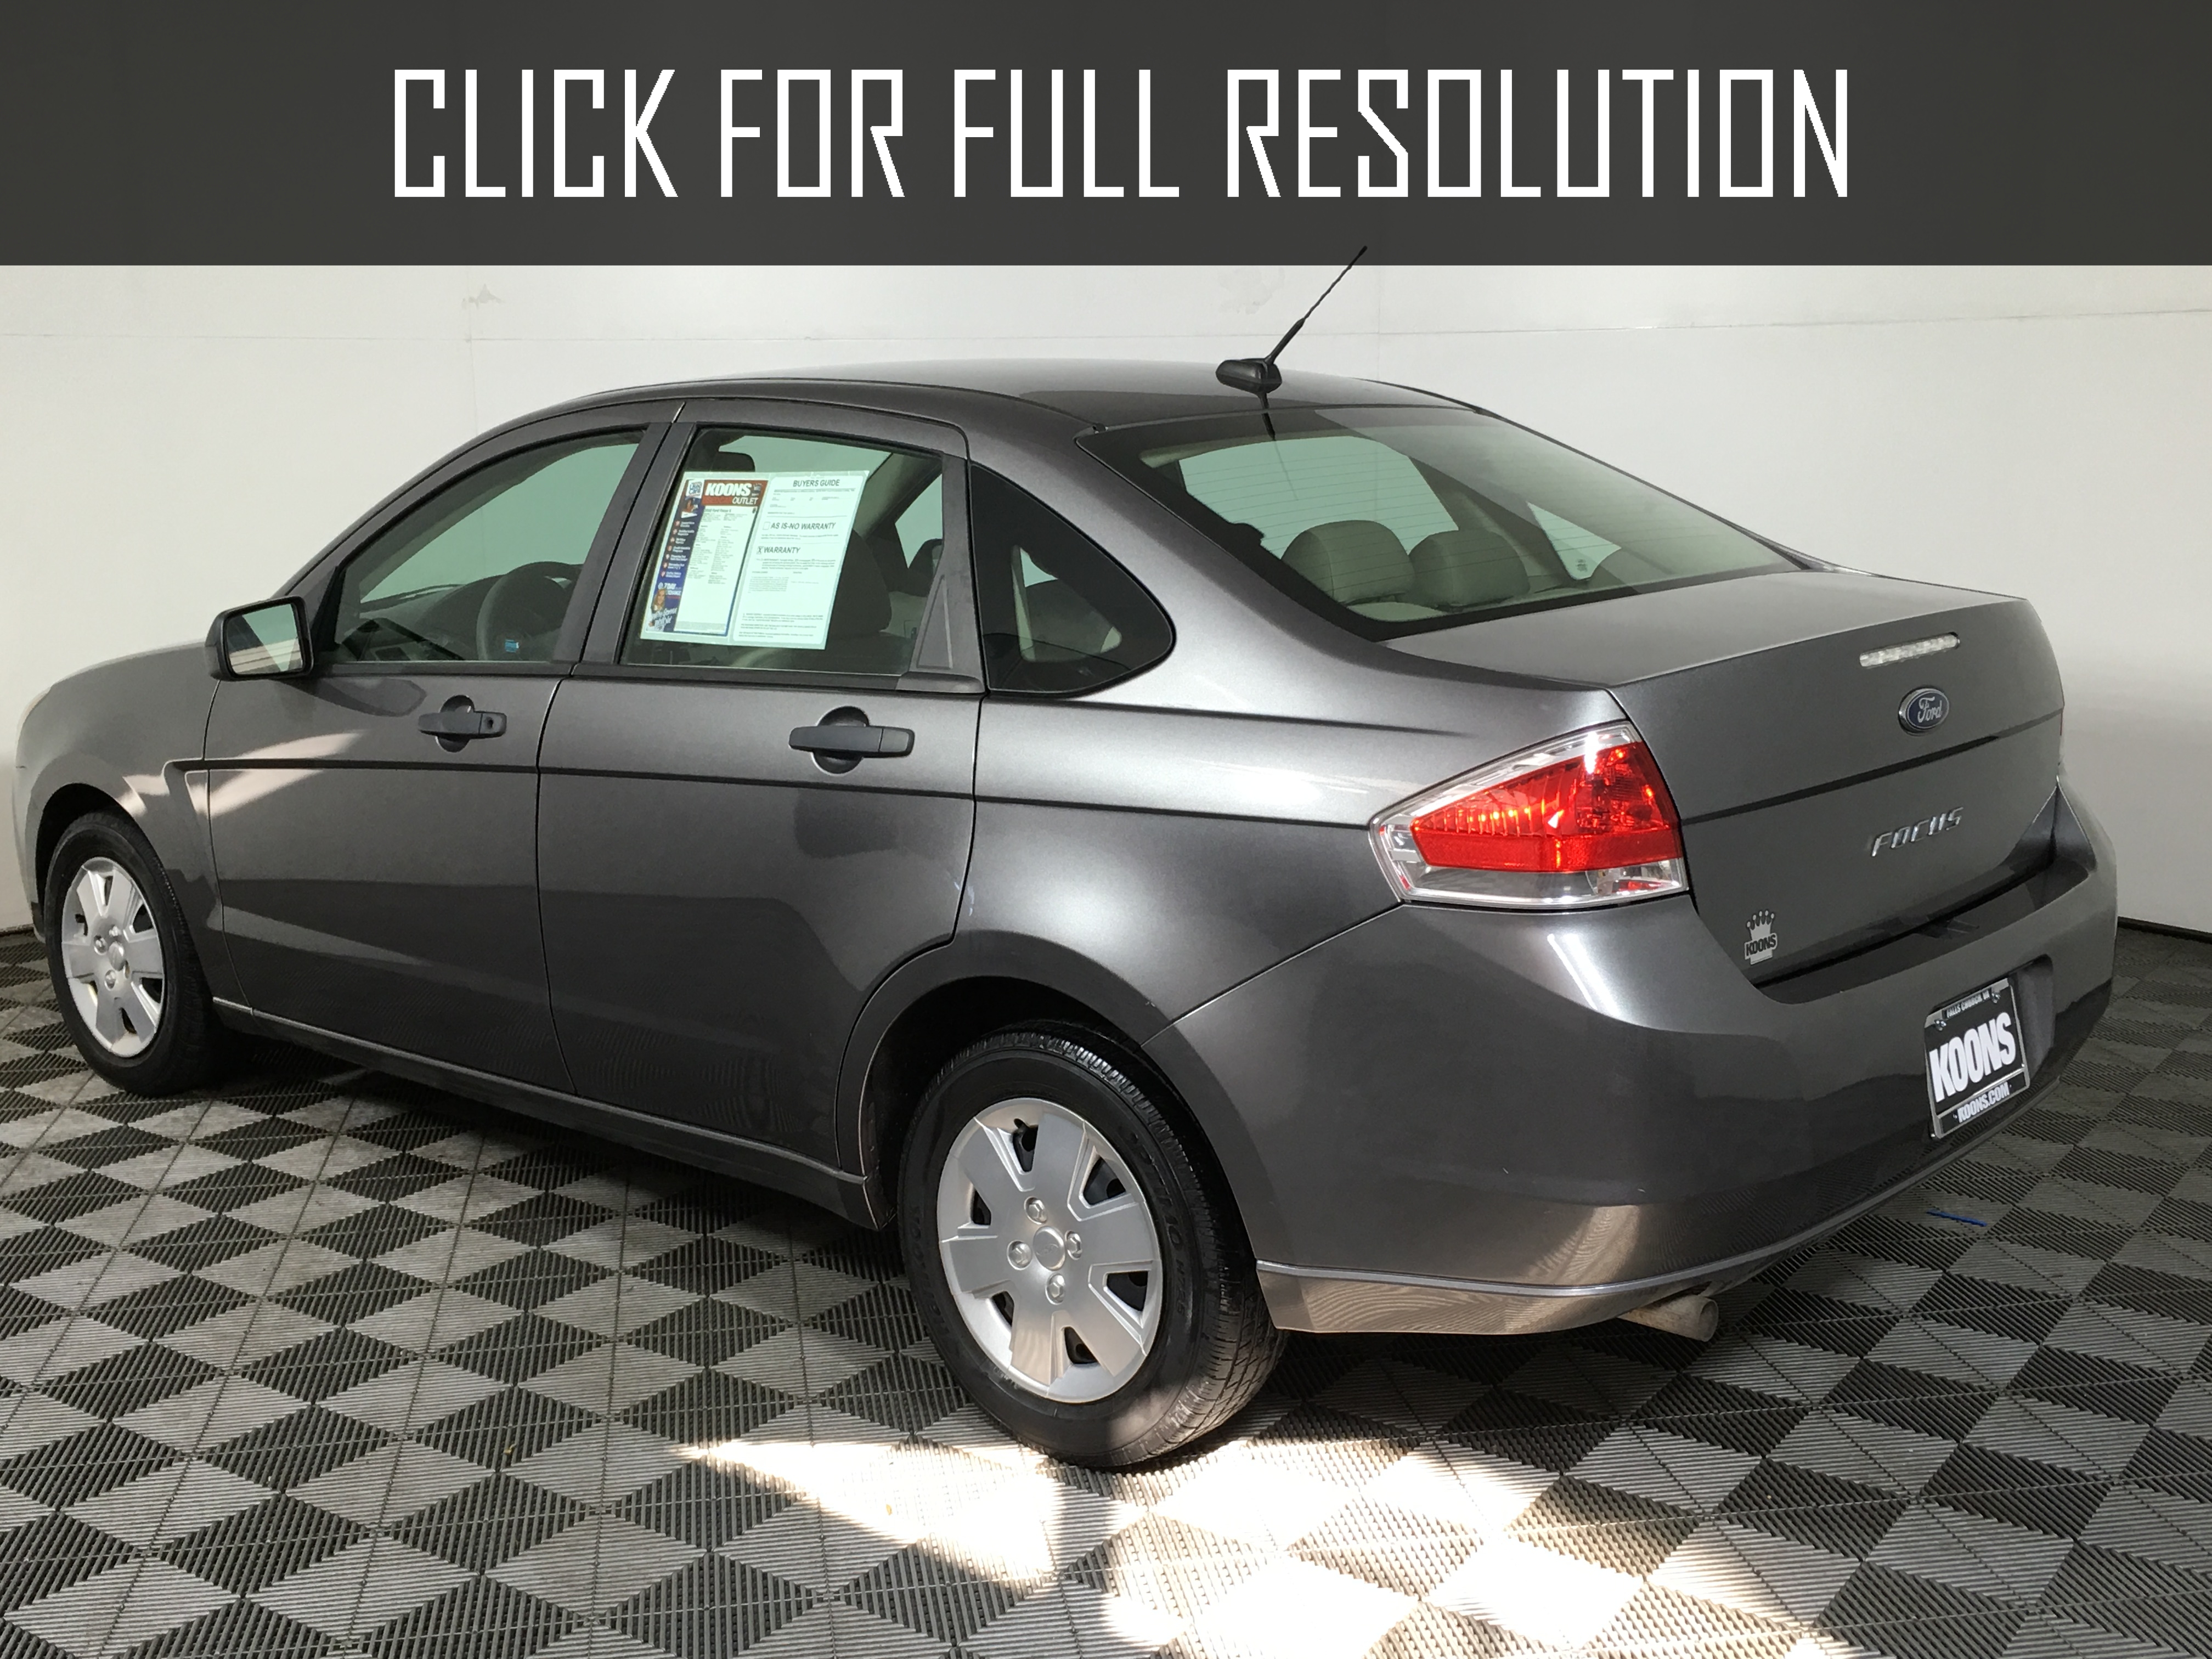 2010 Ford Focus S